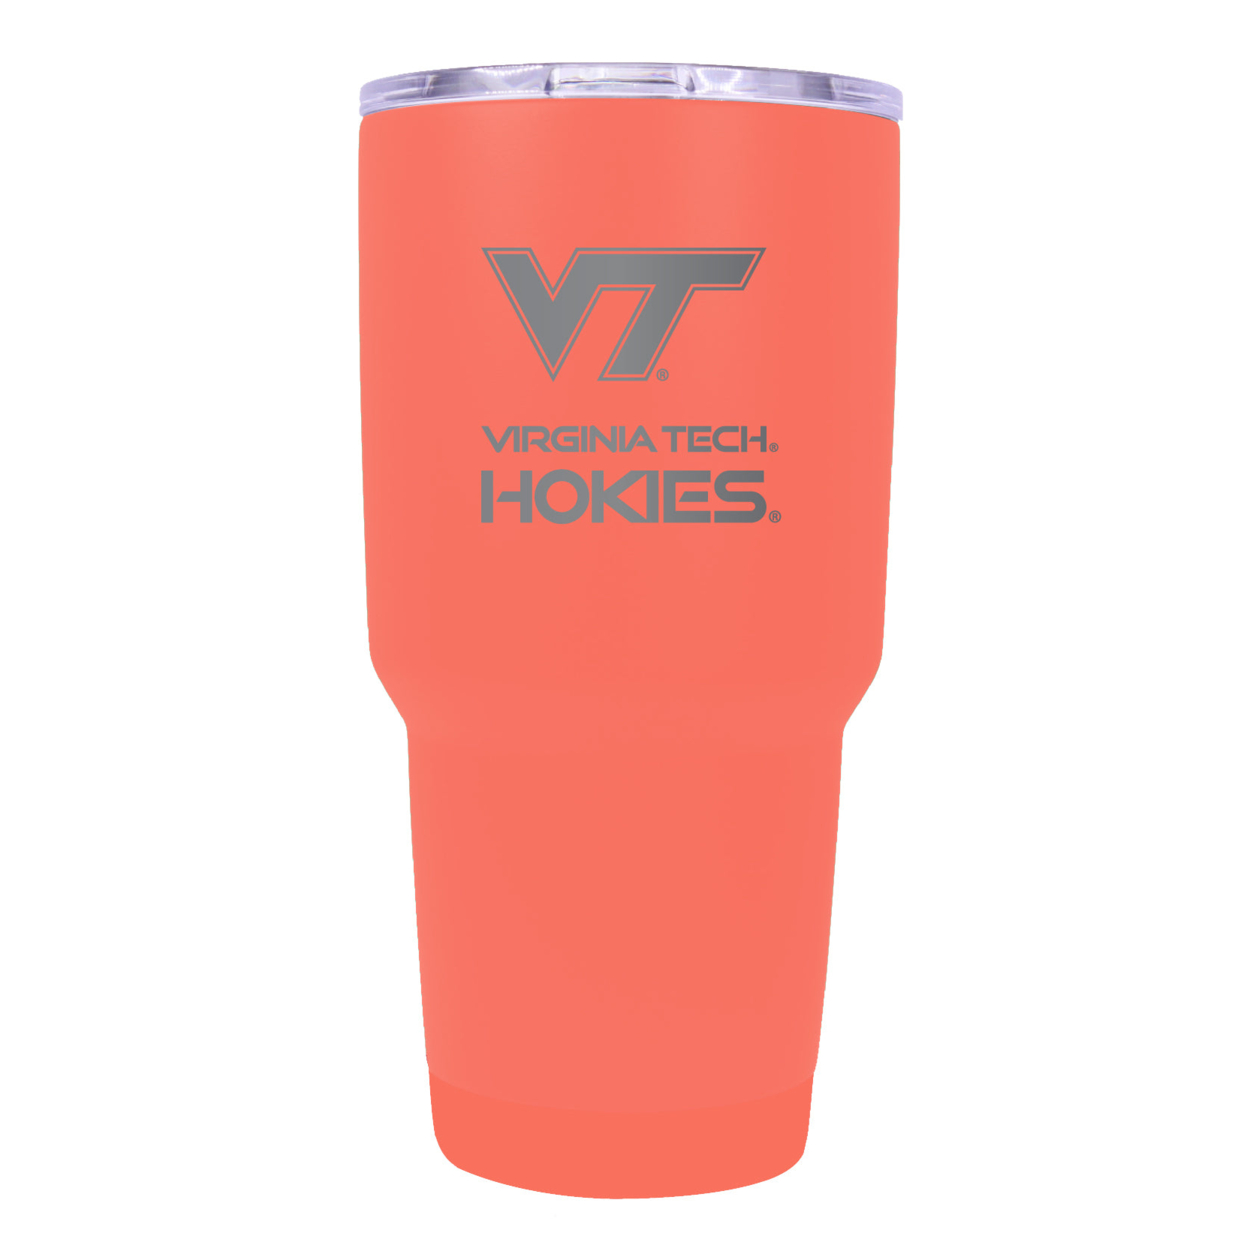 Virginia Tech Hokies 24 Oz Insulated Tumbler Etched - Choose Your Color - Coral